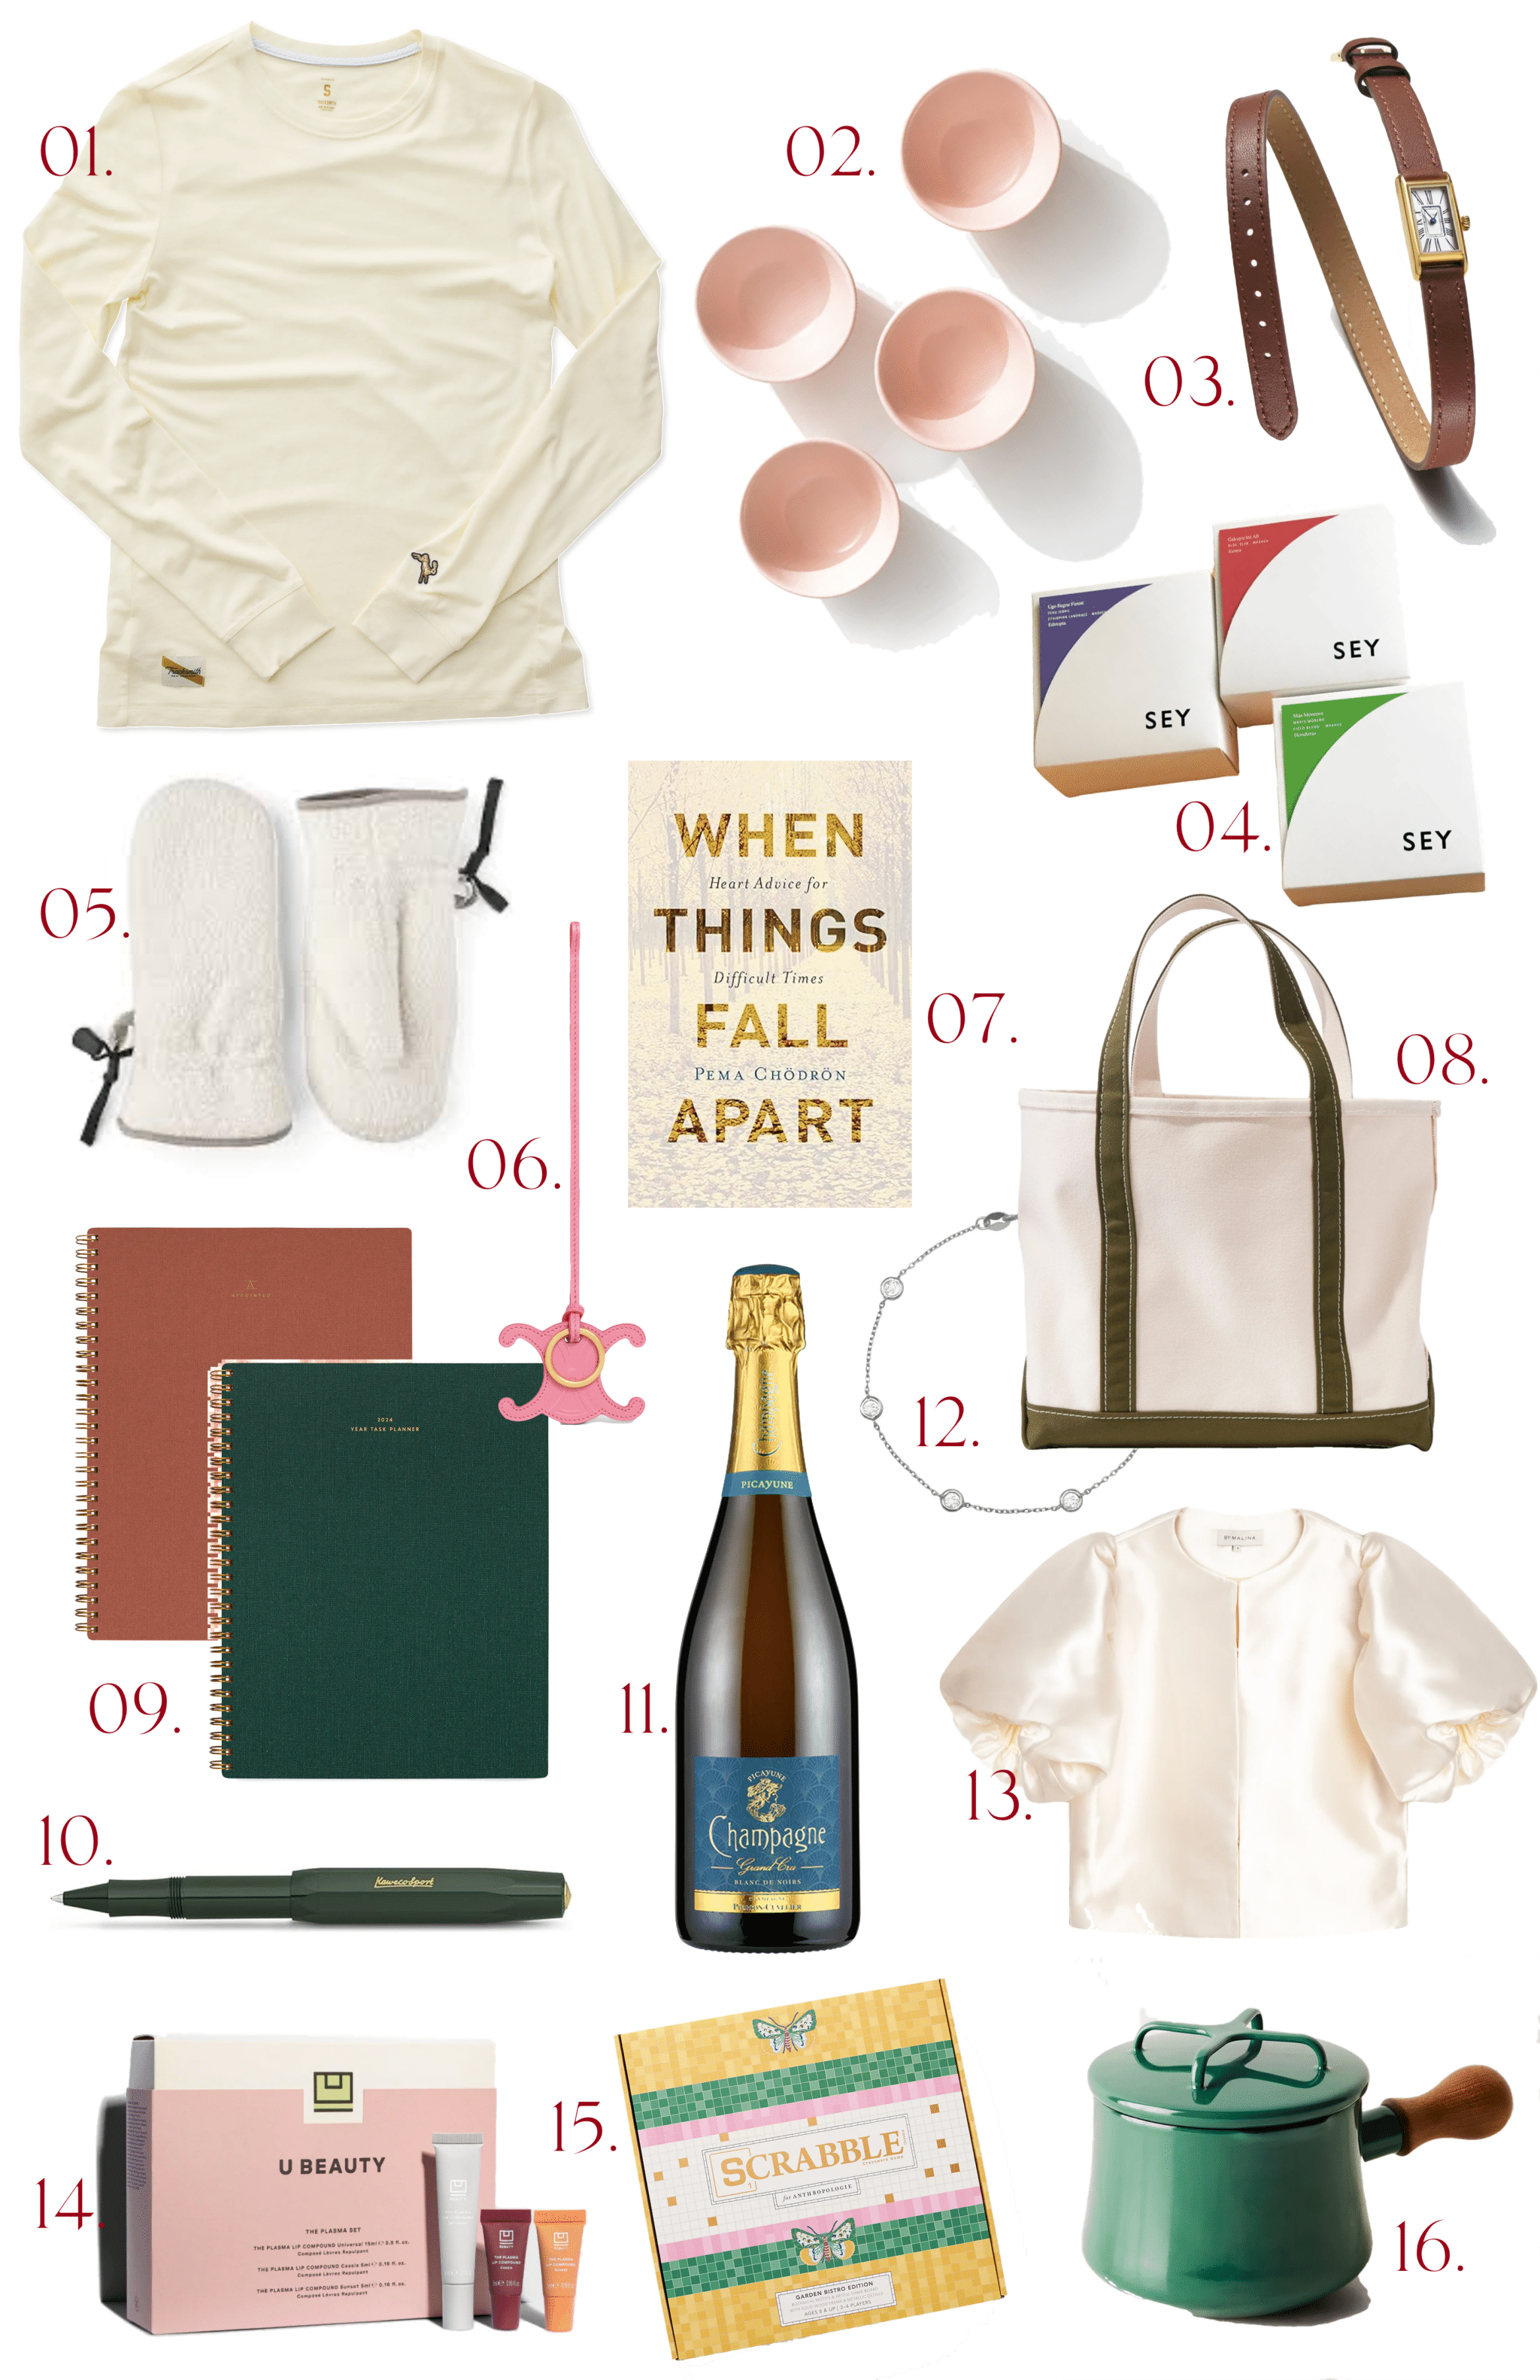 Here's What Christmas Gifts To Buy For The Woman In Your Life Who